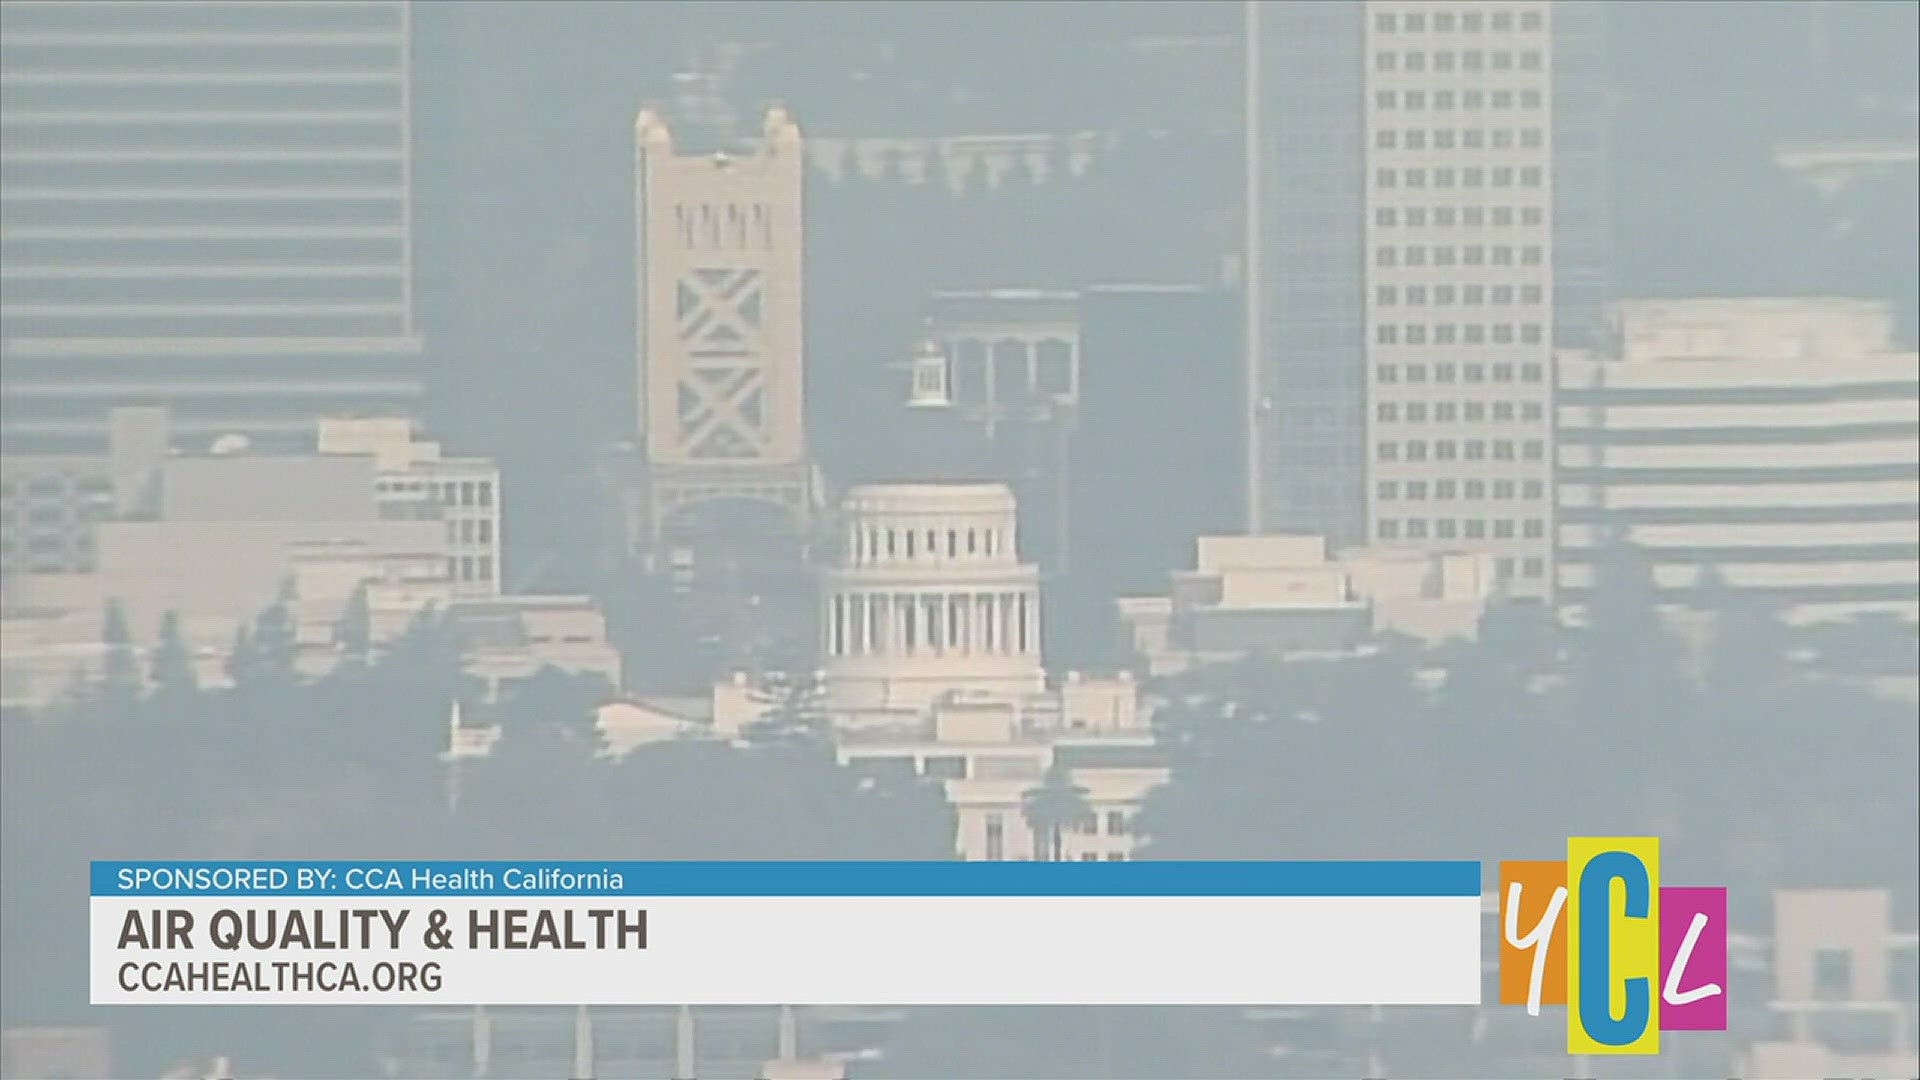 Poor air quality creates several health issues that are not always discussed today. This segment is paid for by CCA Health California.